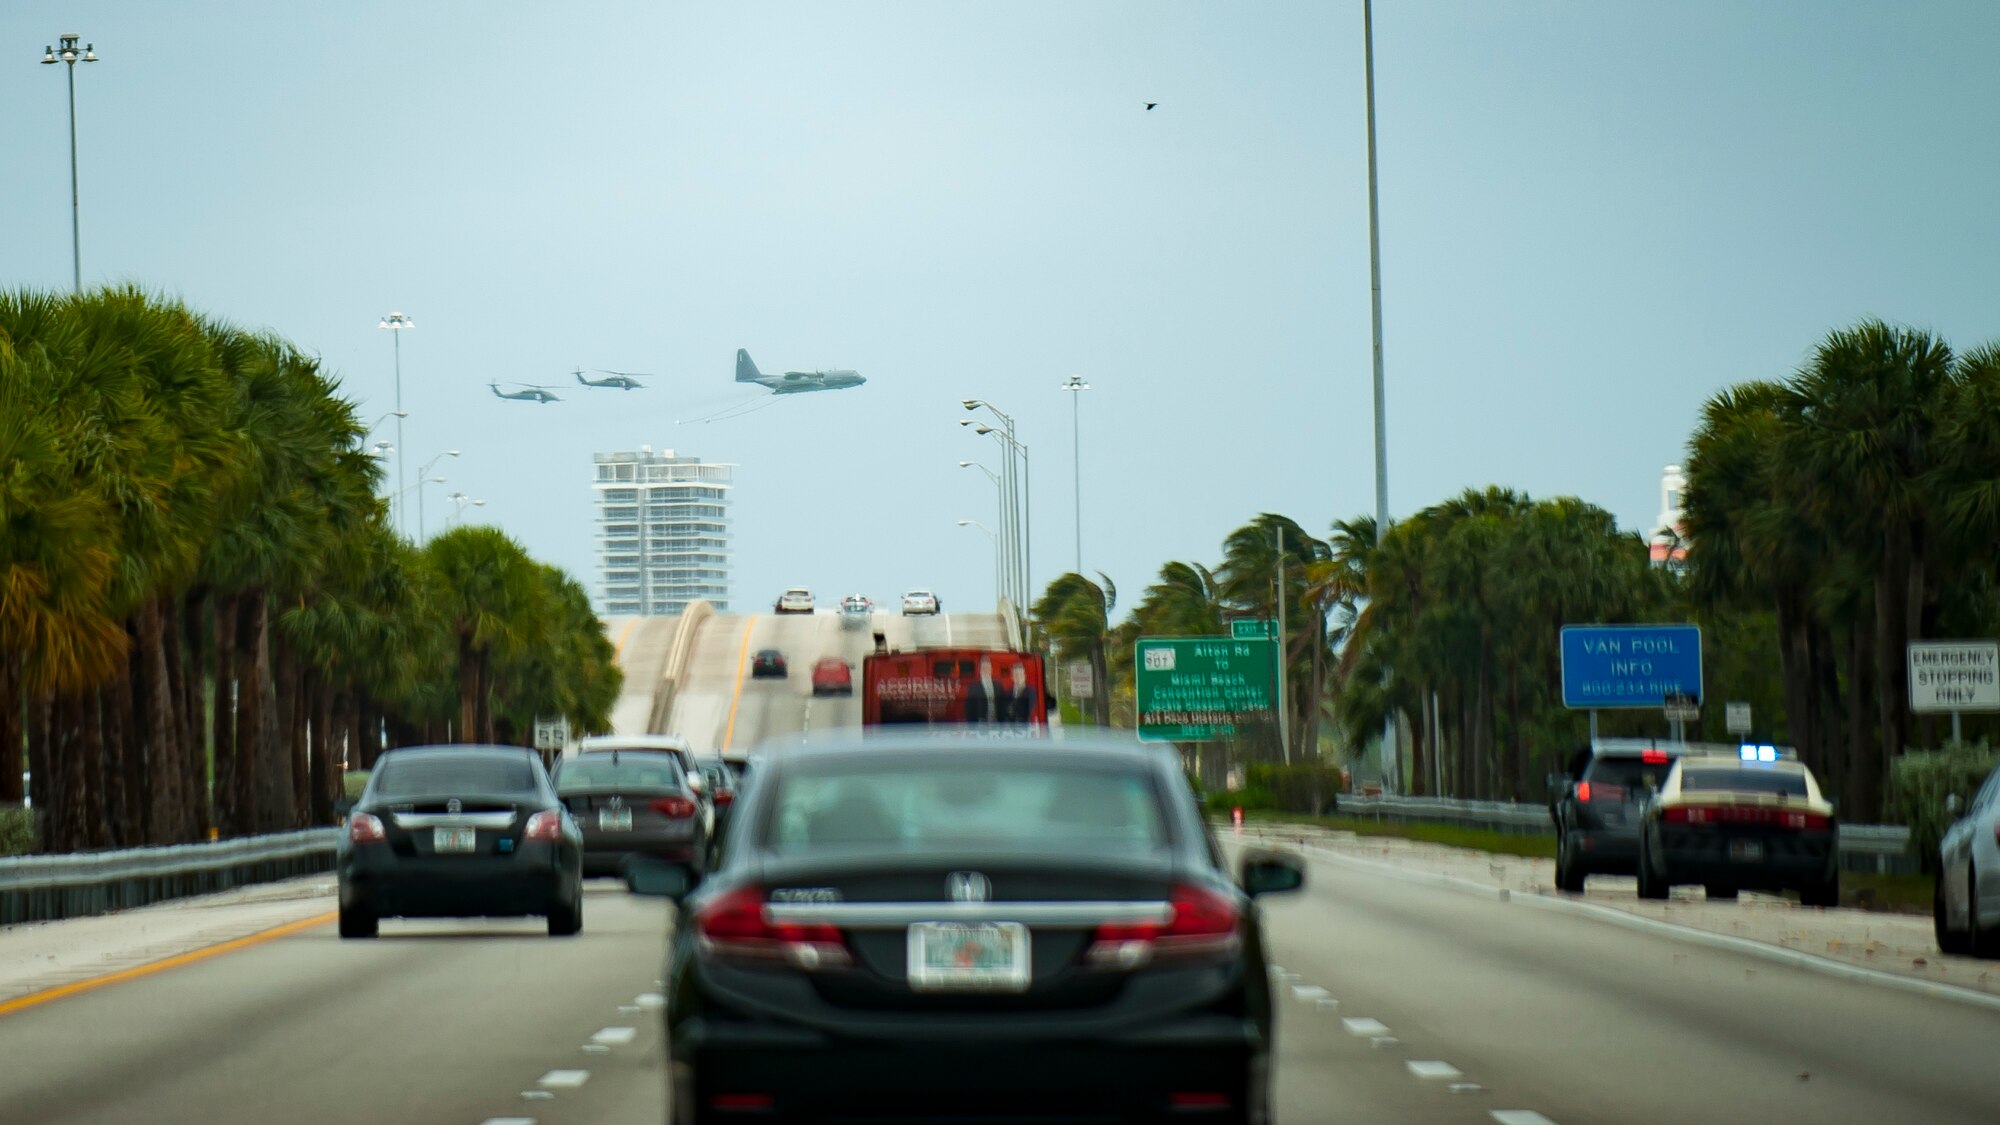 Air Force Reserve Citizen Airmen from the 920th Rescue Wing out of Patrick Air Force Base in Cocoa Beach, Florida fly past Miami Beach aboard an HC-130P/N King airplane and two HH-60G Pave Hawk helicopters on May 27th, 2018 during the 2nd annual Salute to American Heroes Air and Sea Show. This two-day event showcases military fighter jets and other aircraft and equipment from all branches of the United States military in observance of Memorial Day, honoring servicemembers who have made the ultimate sacrifice. (U.S. Air Force photo/Staff Sgt. Jared Trimarchi)